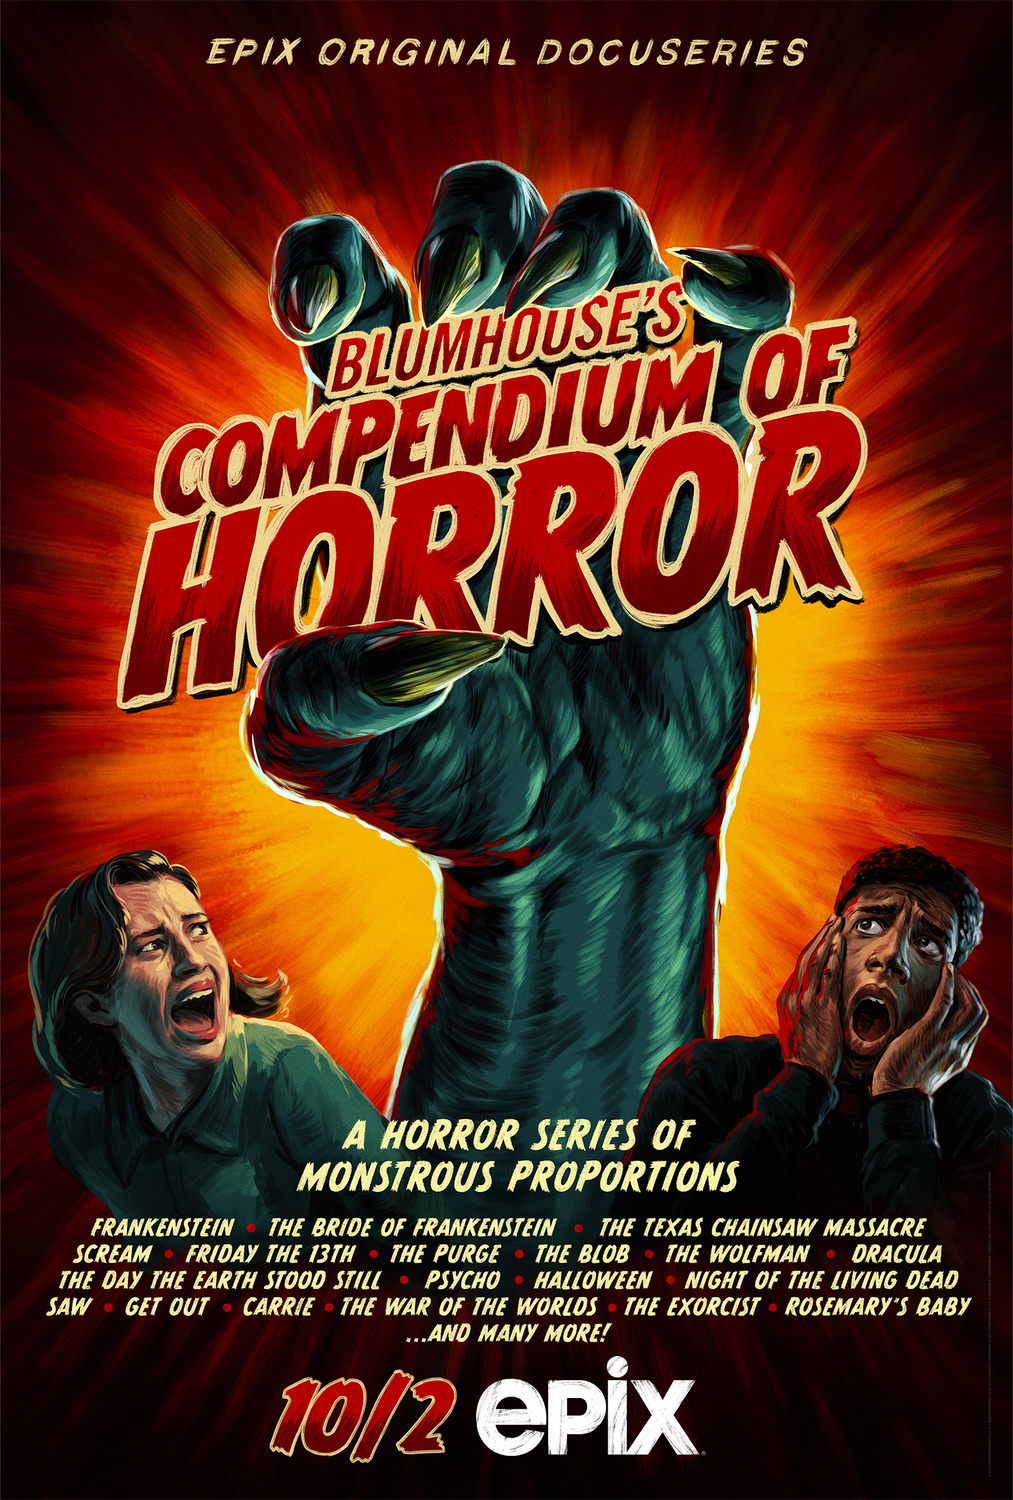 Extra Large TV Poster Image for Blumhouse's Compendium of Horror 